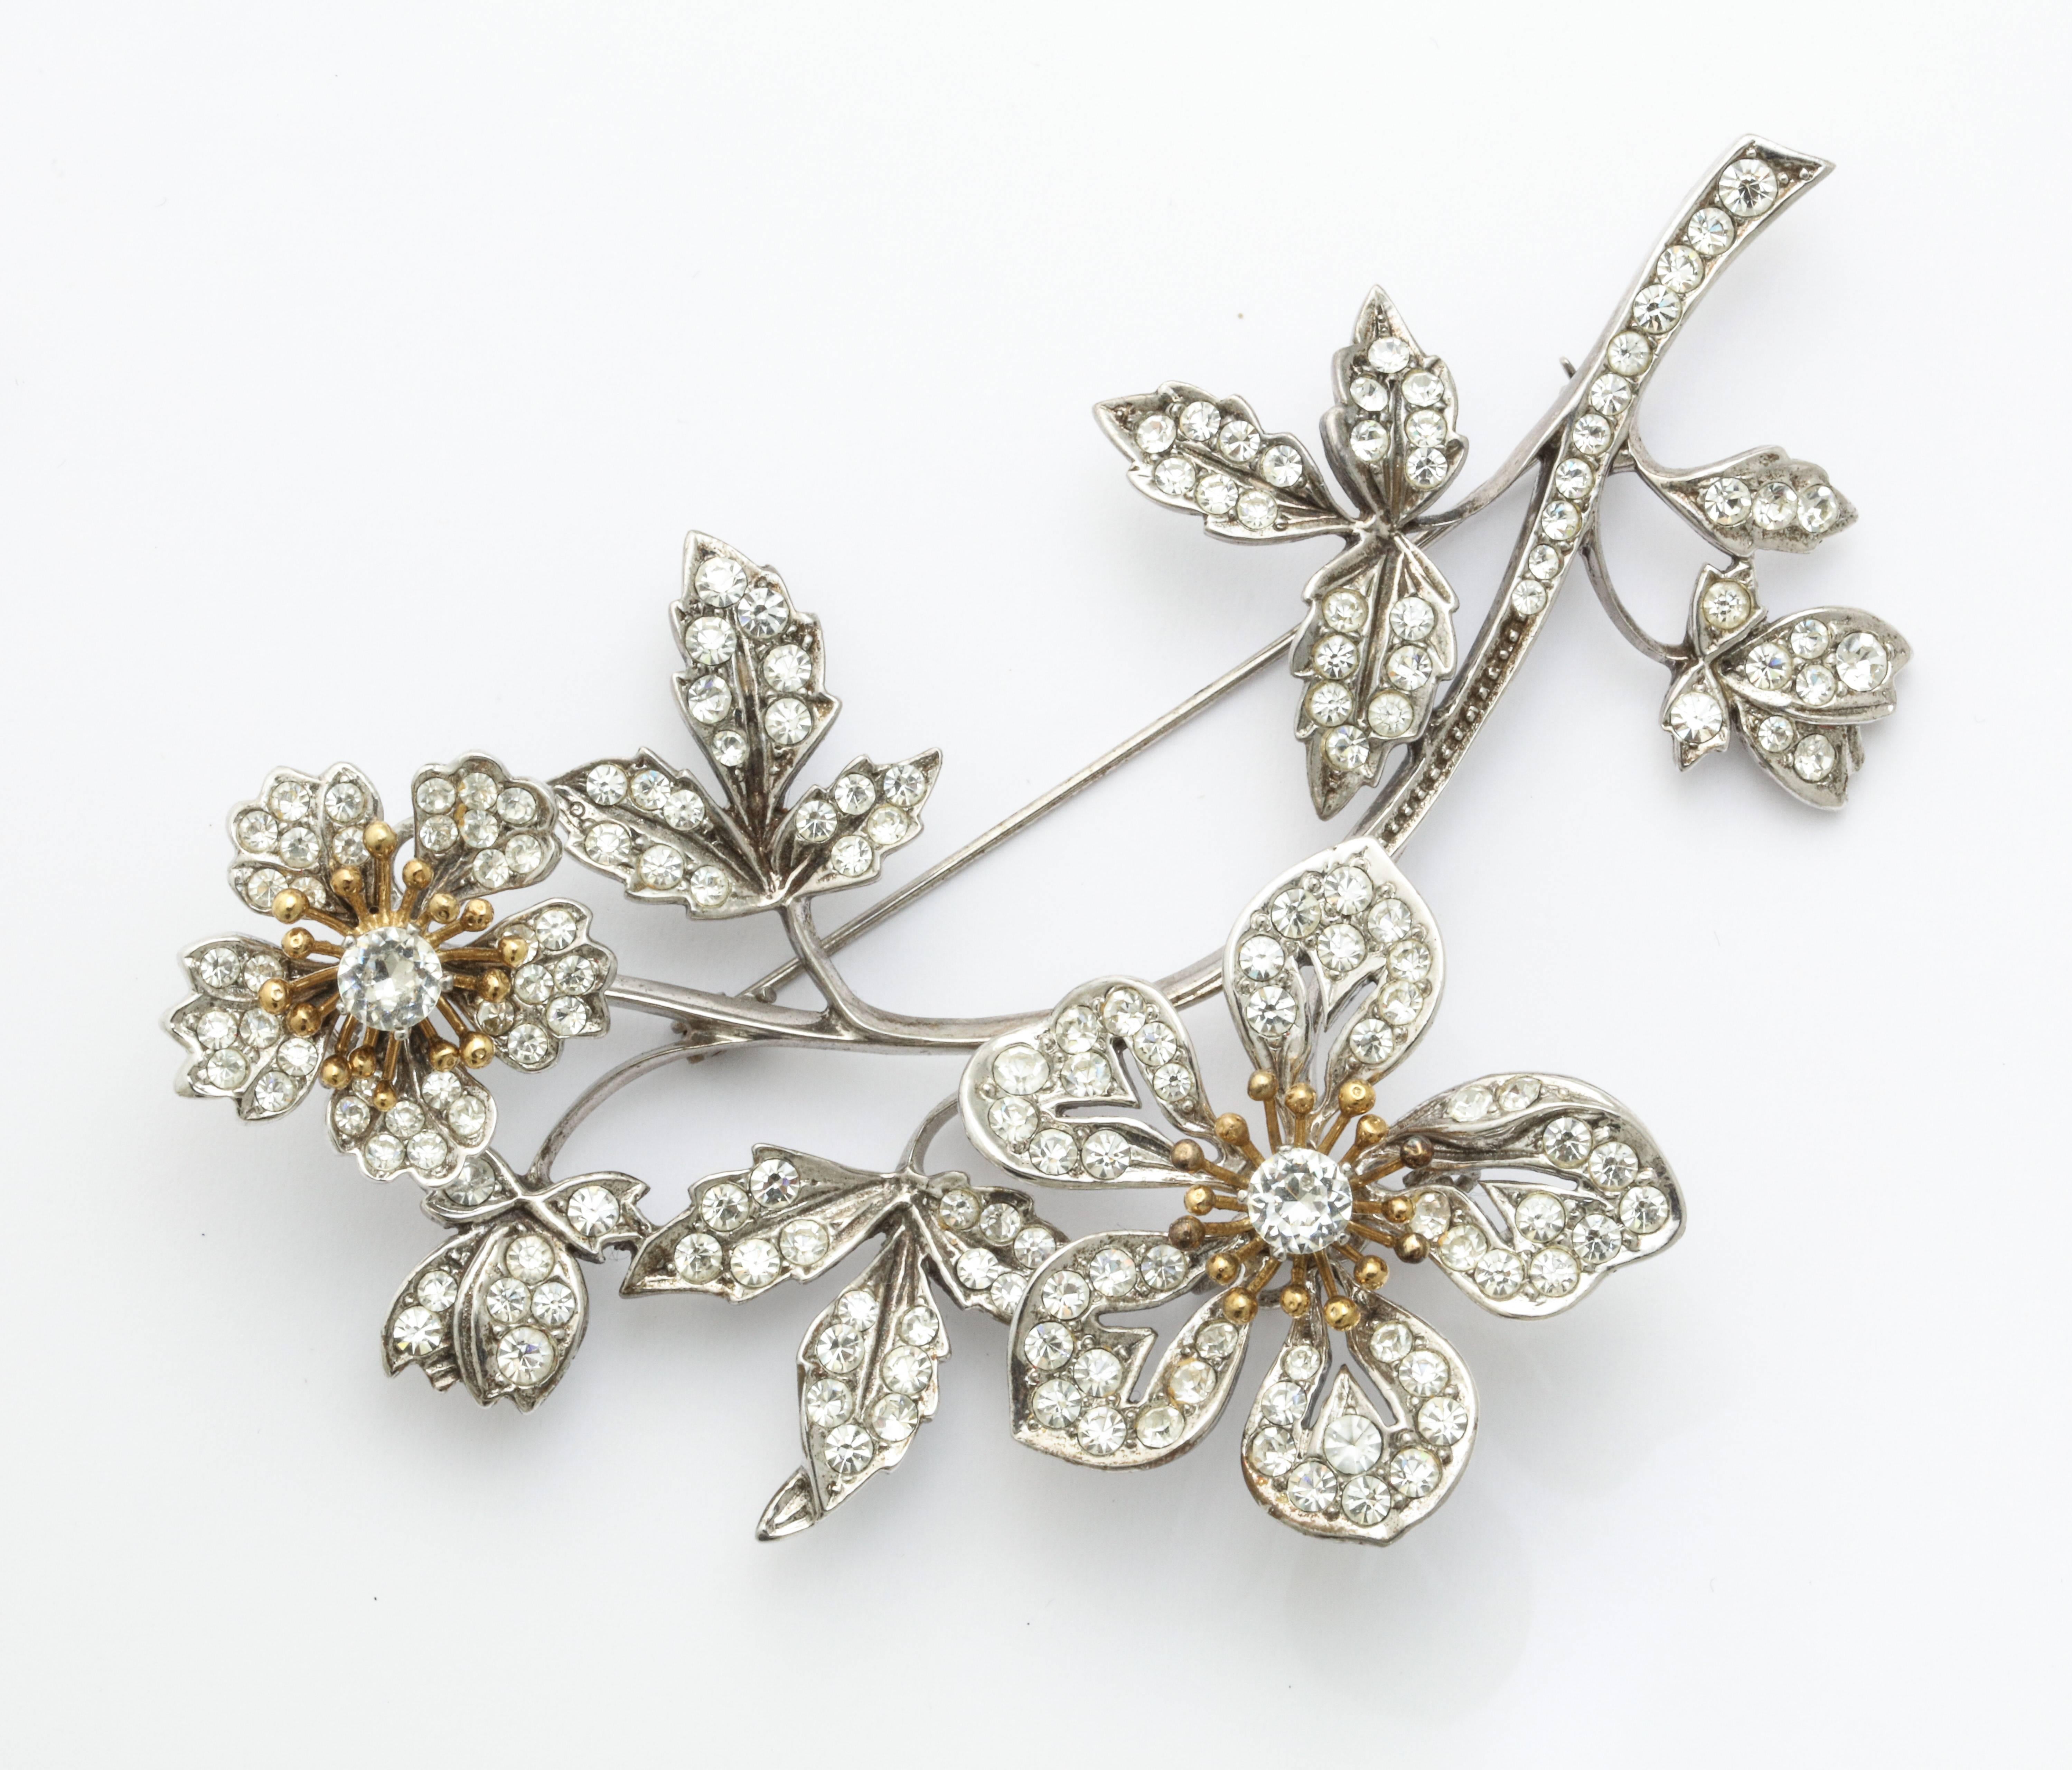 A shimmering floral tremblant pin marked 925 and designers stamp with moving flower crystals on finely crafted silver stem. With matching clip earrings. 